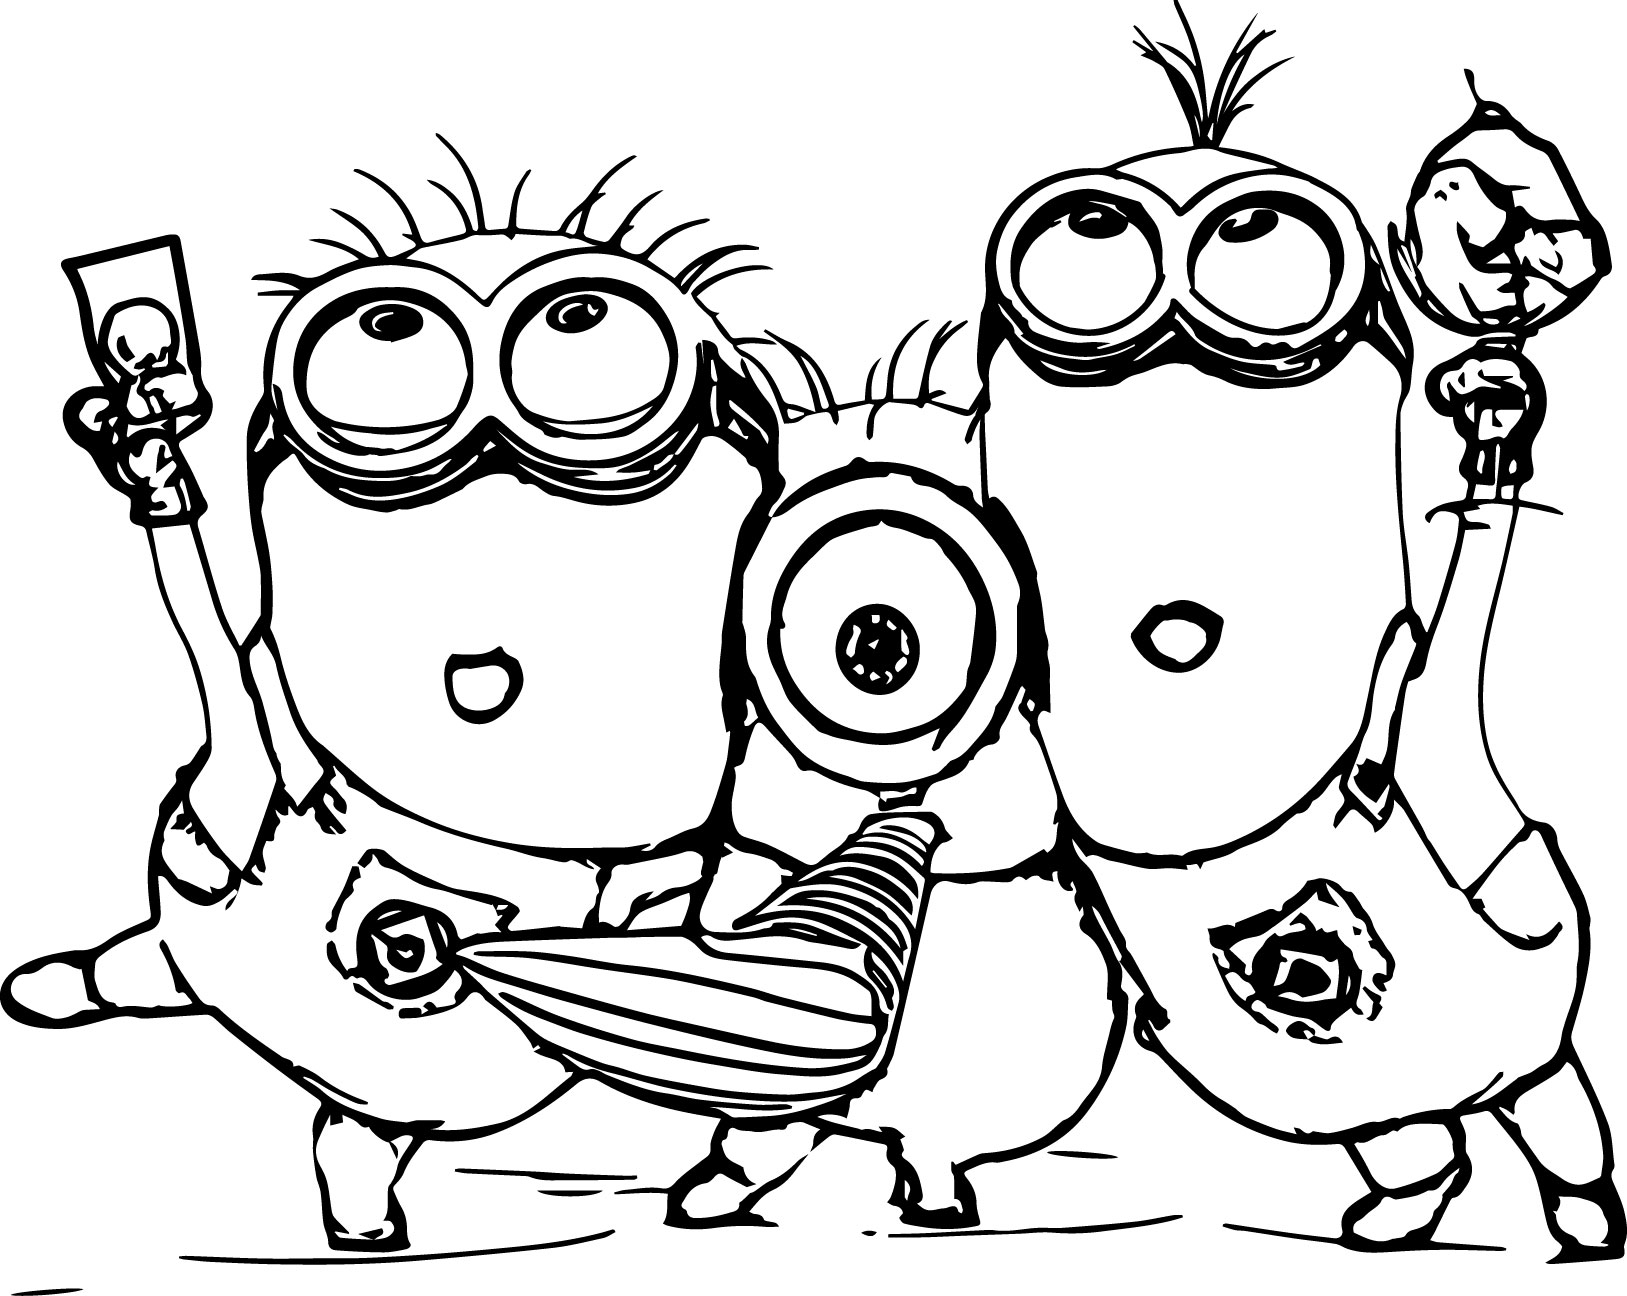 567 Unicorn The Minions Coloring Pages 